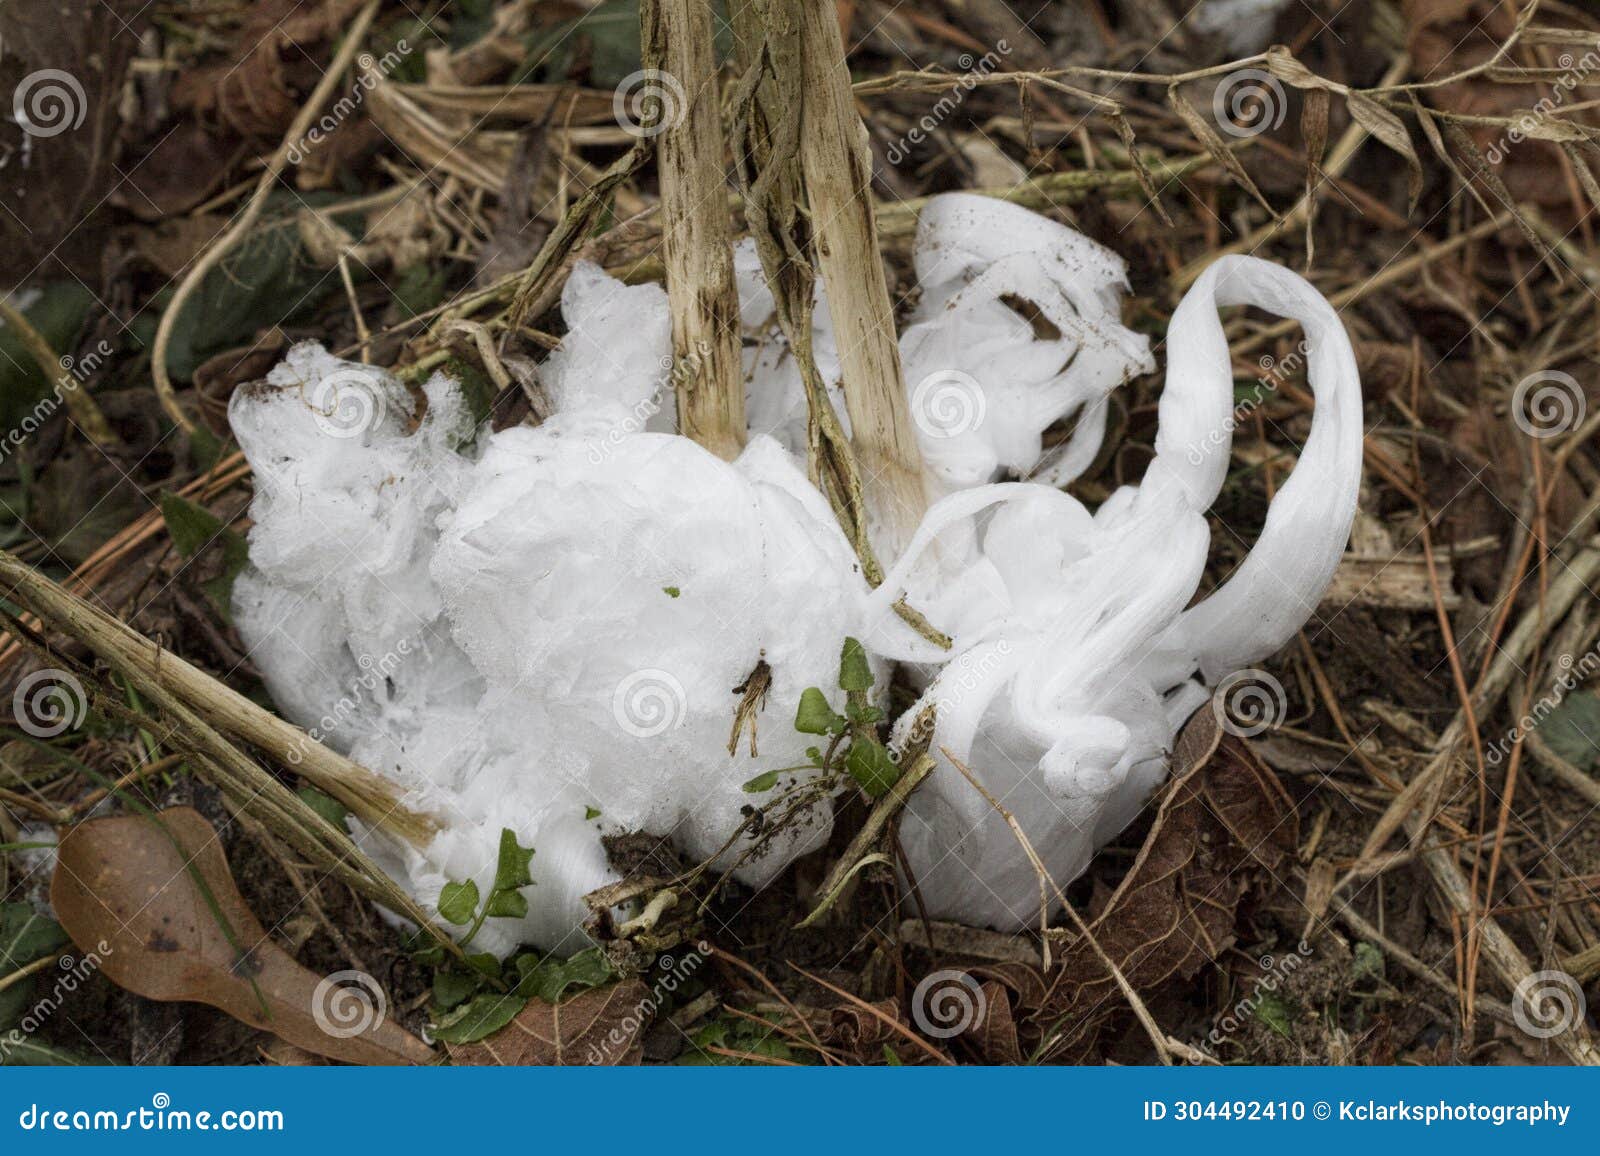 unusual rare frost flowers - ice flowers - ice fringes or filaments